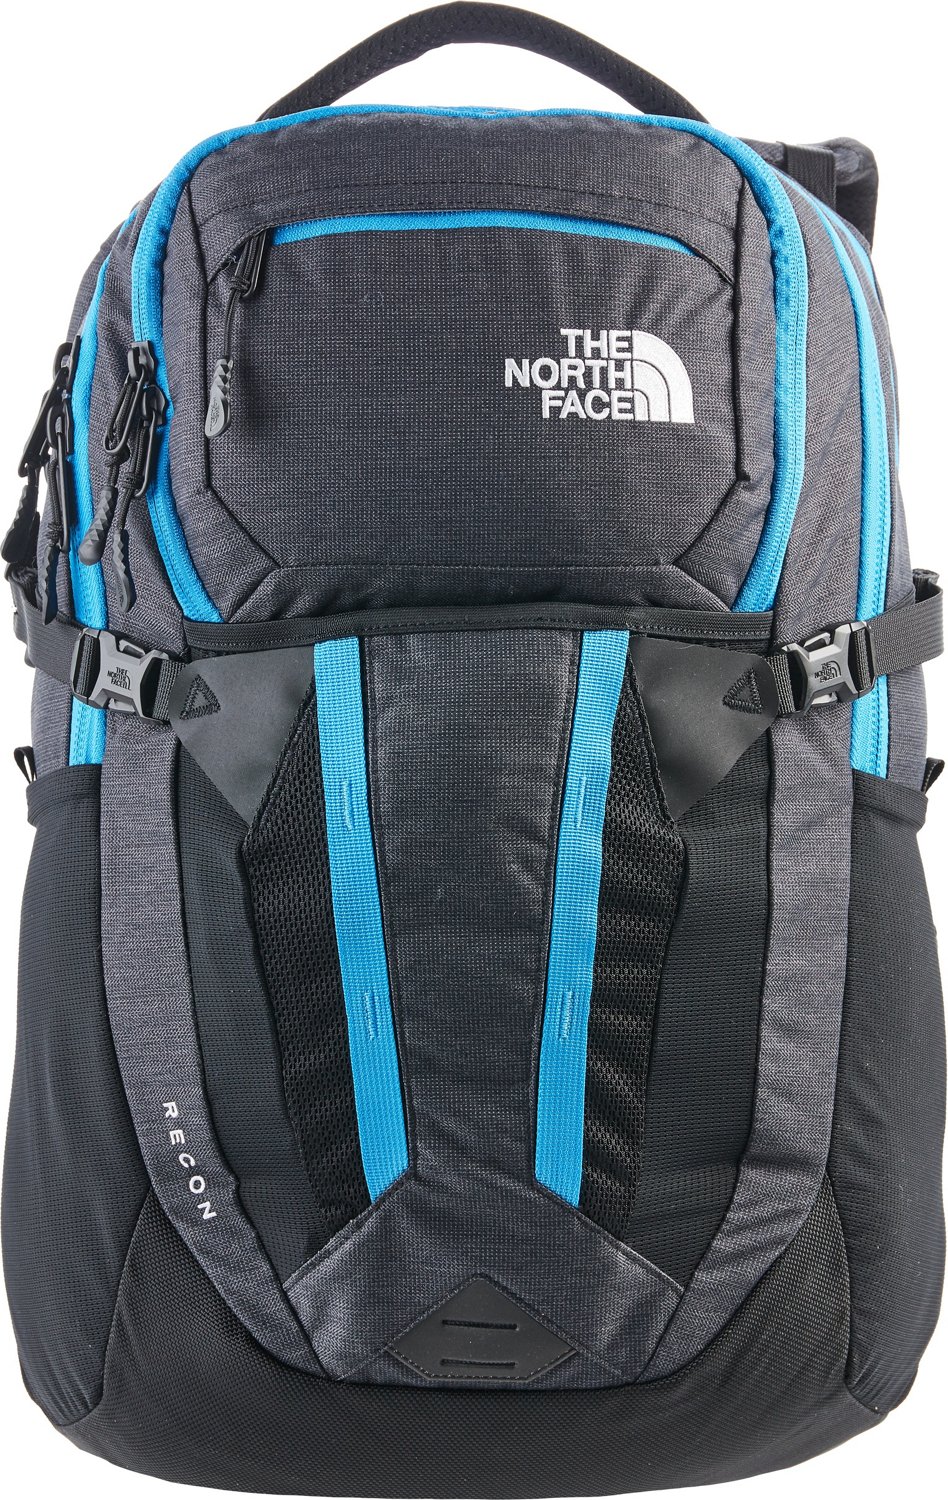 The North Face Recon Backpack | Academy